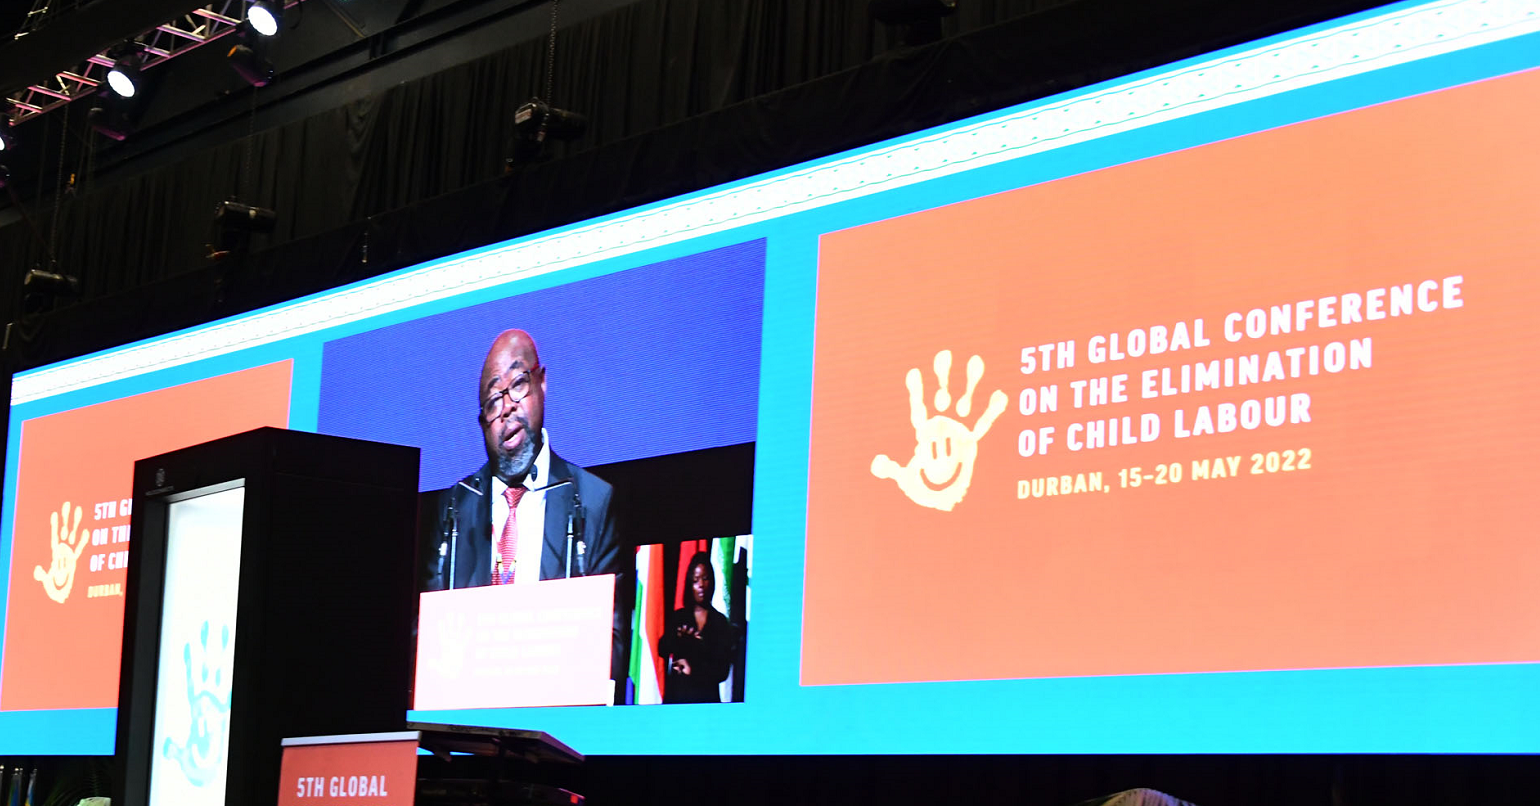 A photo of the screens at the International Labour Organisation’s 5th Global Conference on Elimination of Child Labour, displaying the logo of the event and a speaker addressing the conference